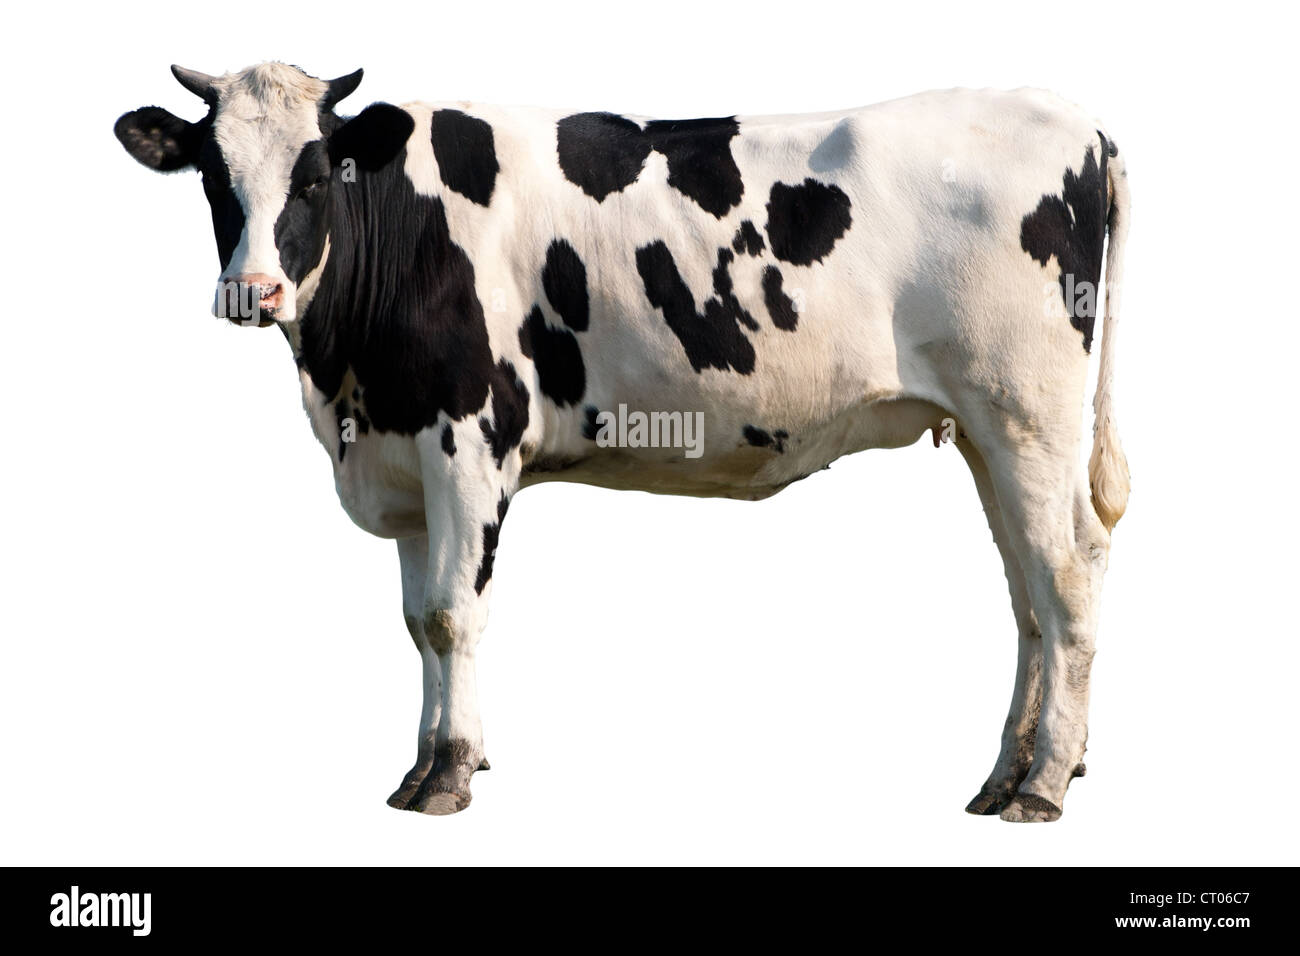 Black and white cow isolated Stock Photo